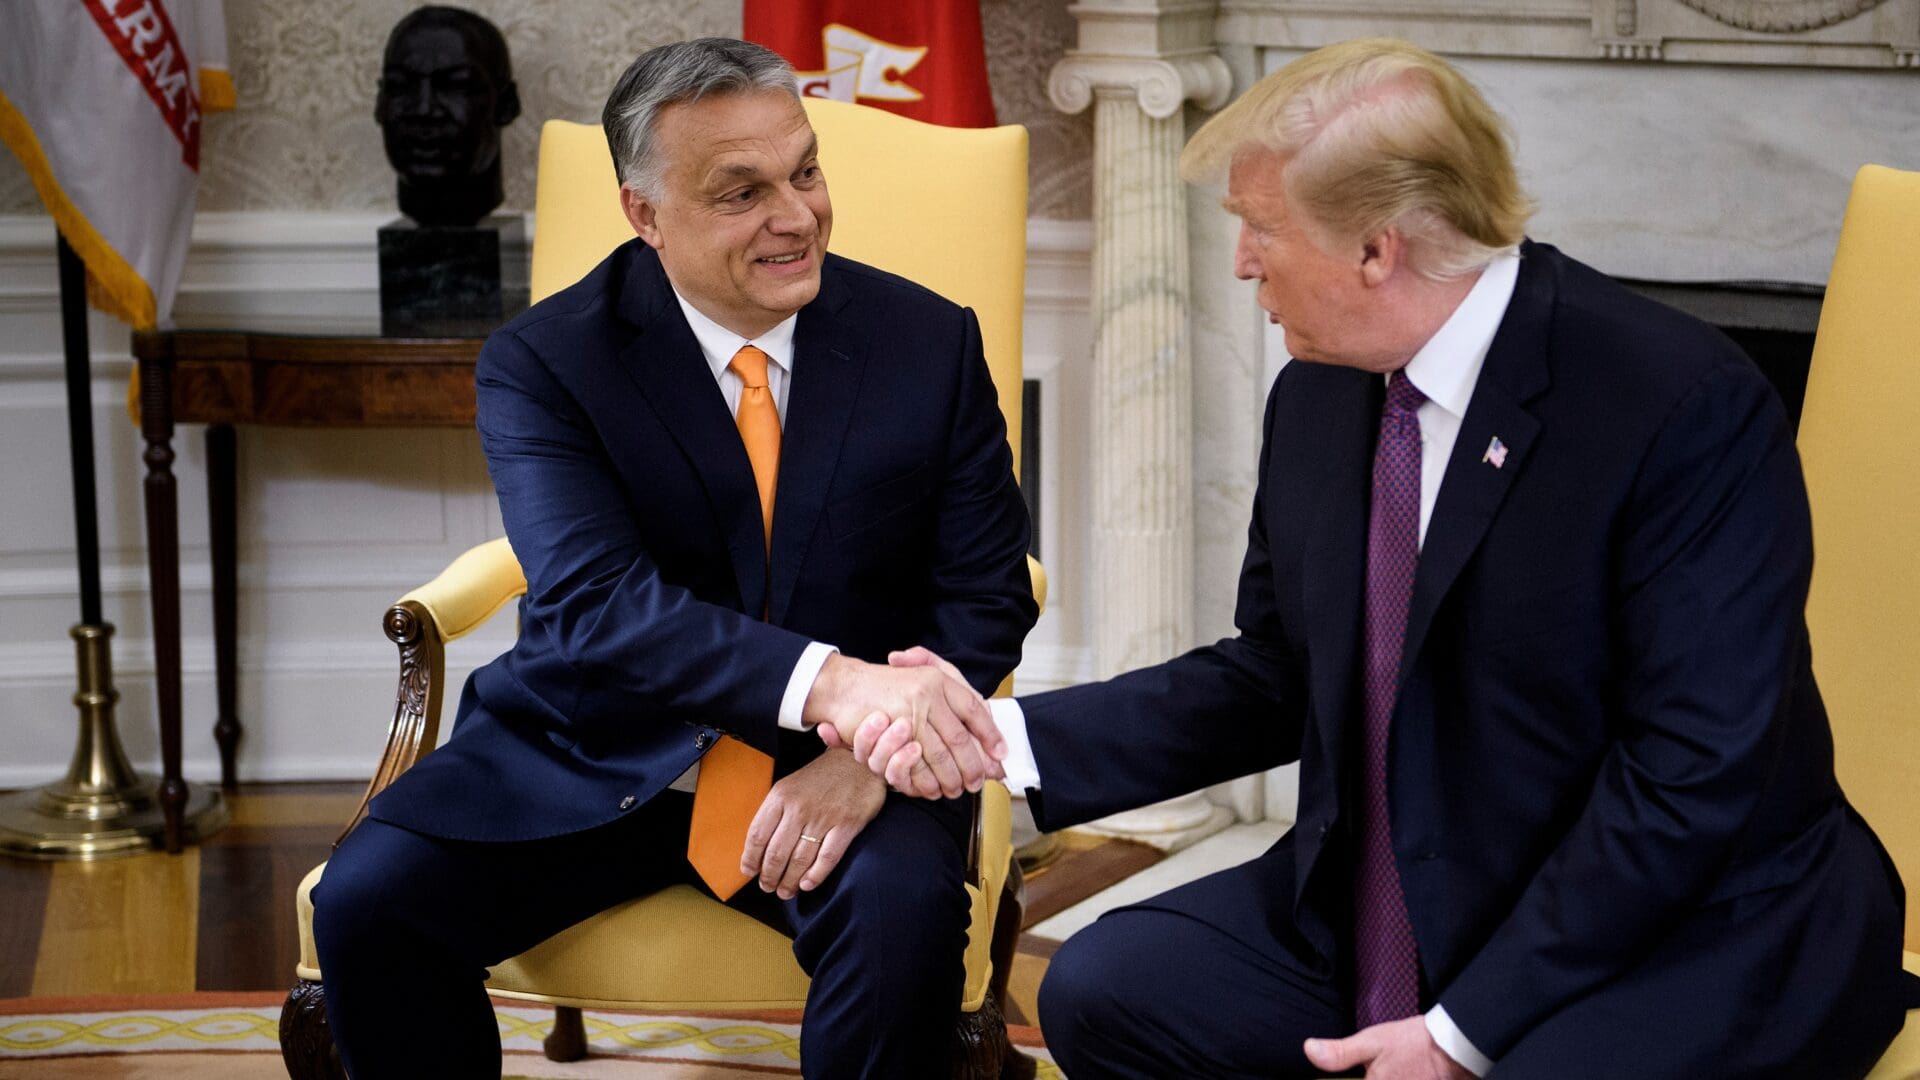 Viktor Orbán and US President Donald Trump shake hands before a meeting in the Oval Office on 13 May 2019 in Washington, DC.